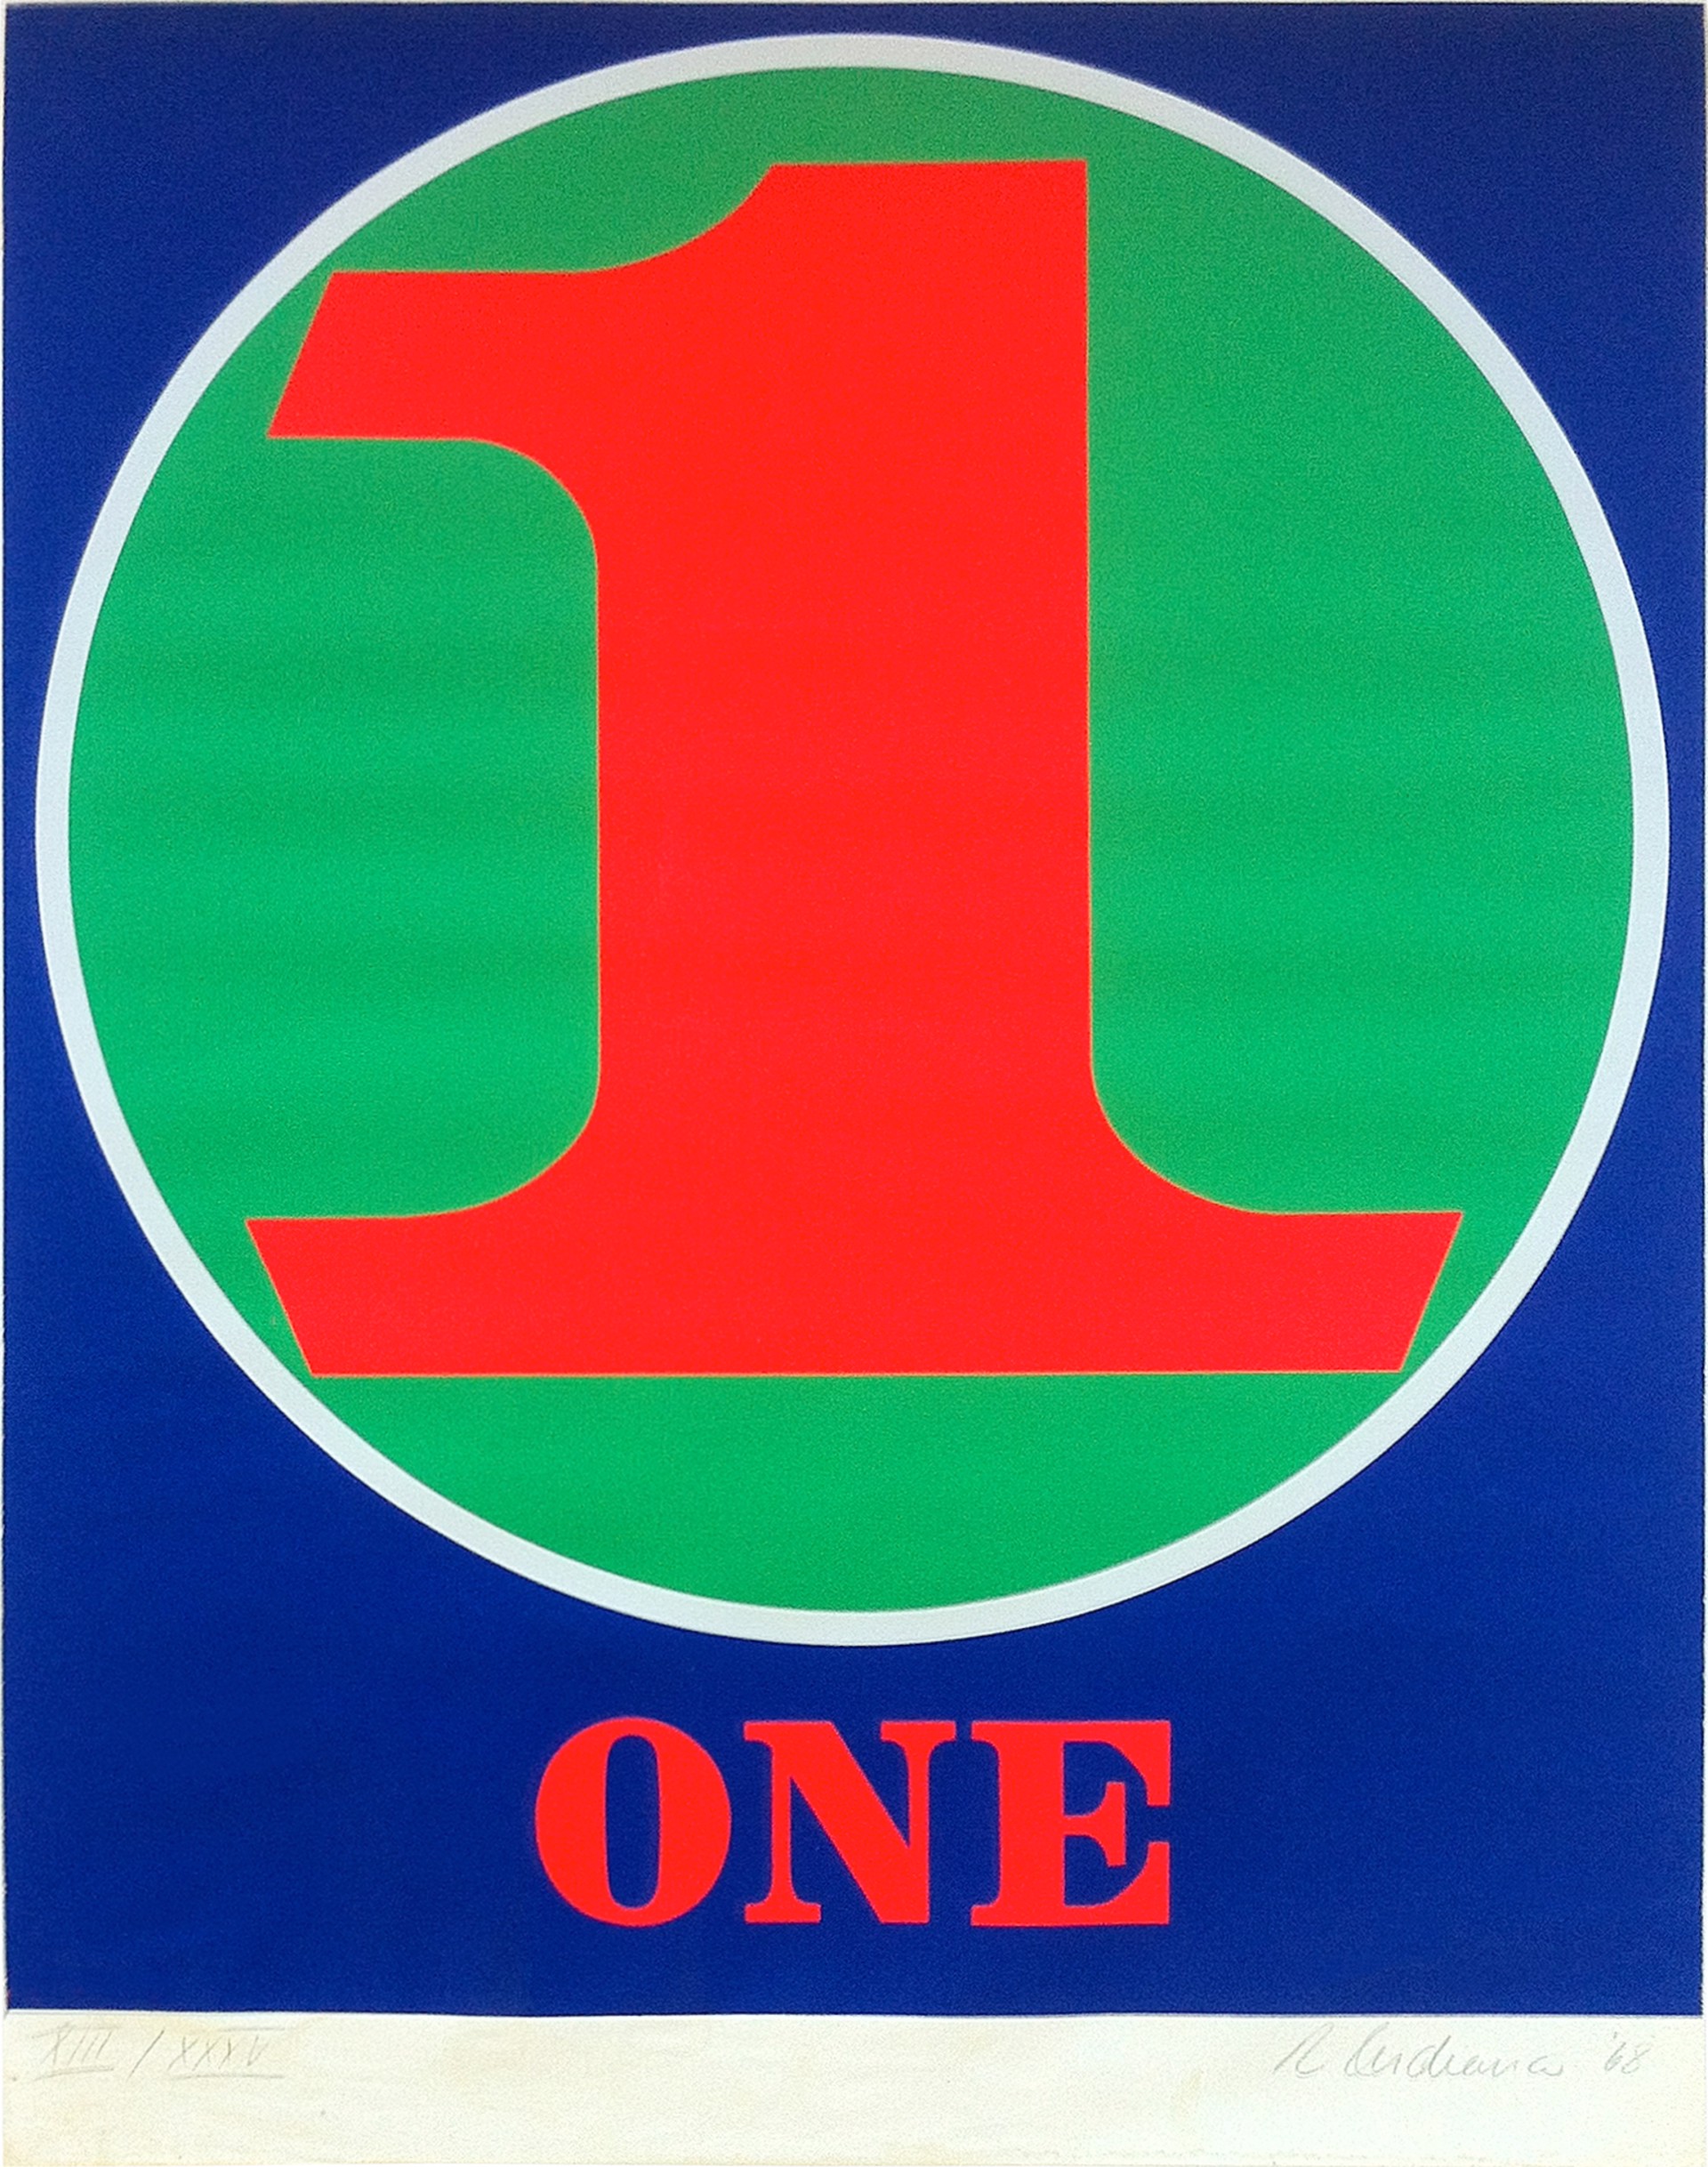 One, from Numbers portfolio by Robert Indiana